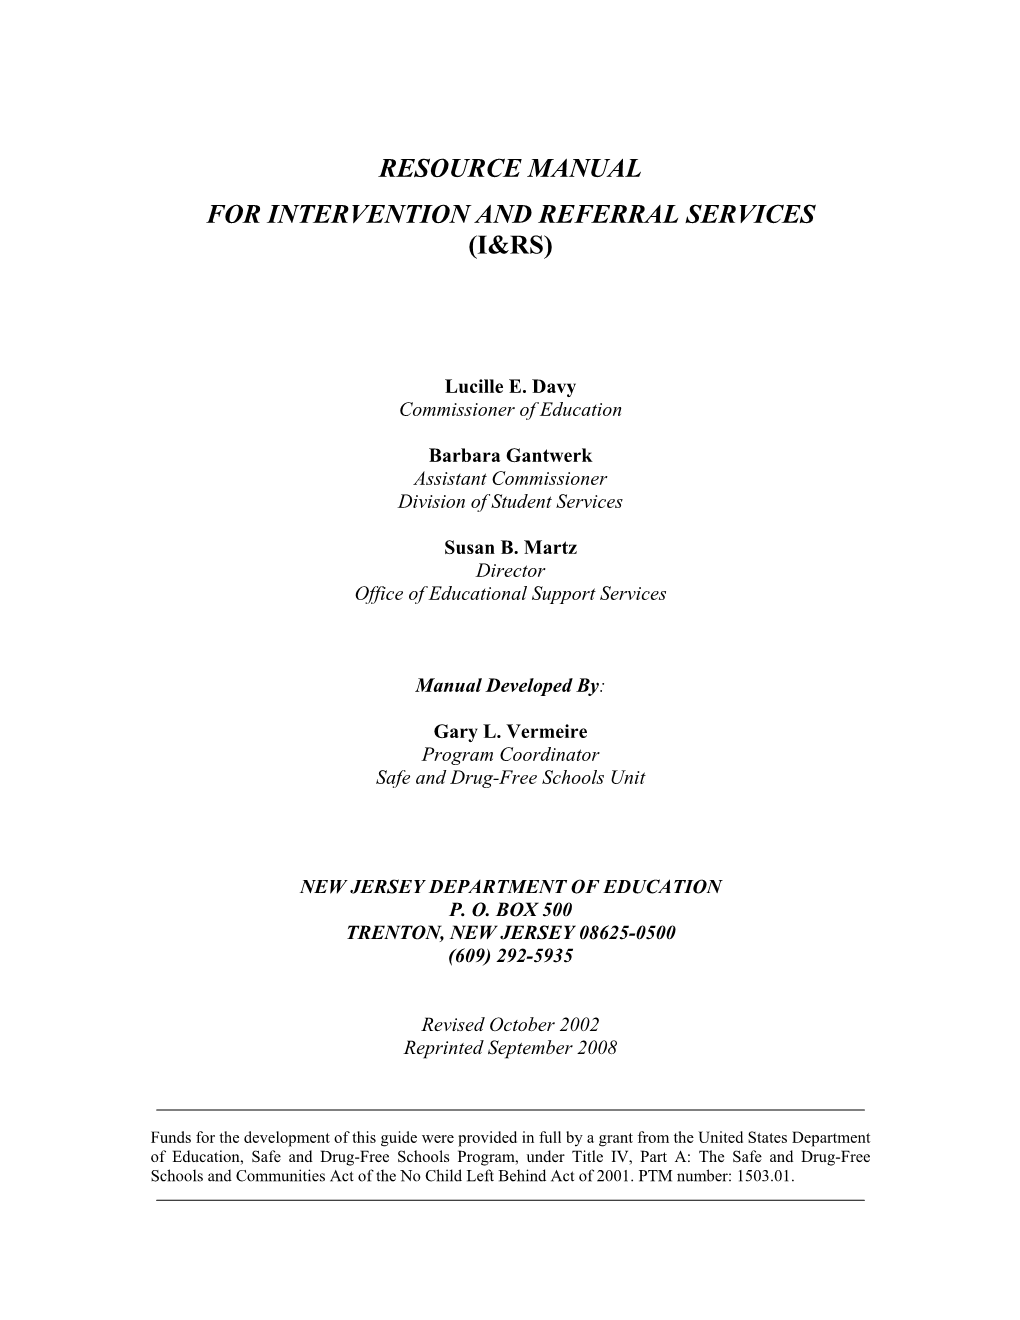 Resource Manual for Intervention and Referral Services (I&Rs)